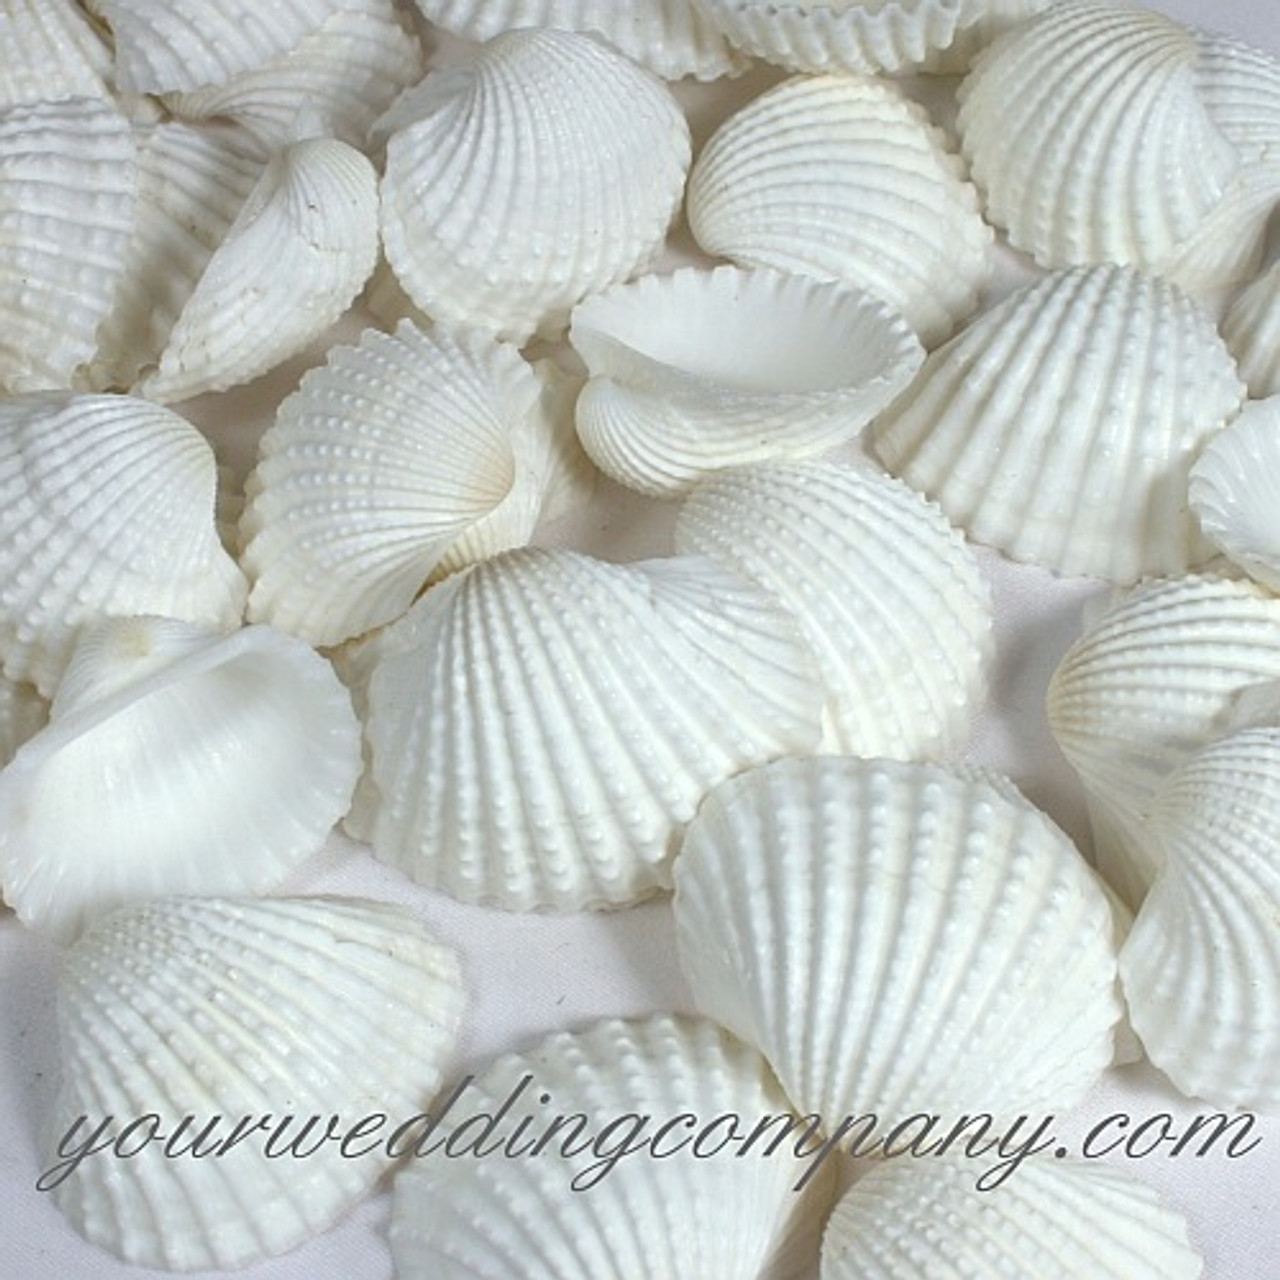 1.25-1.5" Details about   24 Beautiful Small White Ark Shells Beach Wedding Decor Arts Crafts 